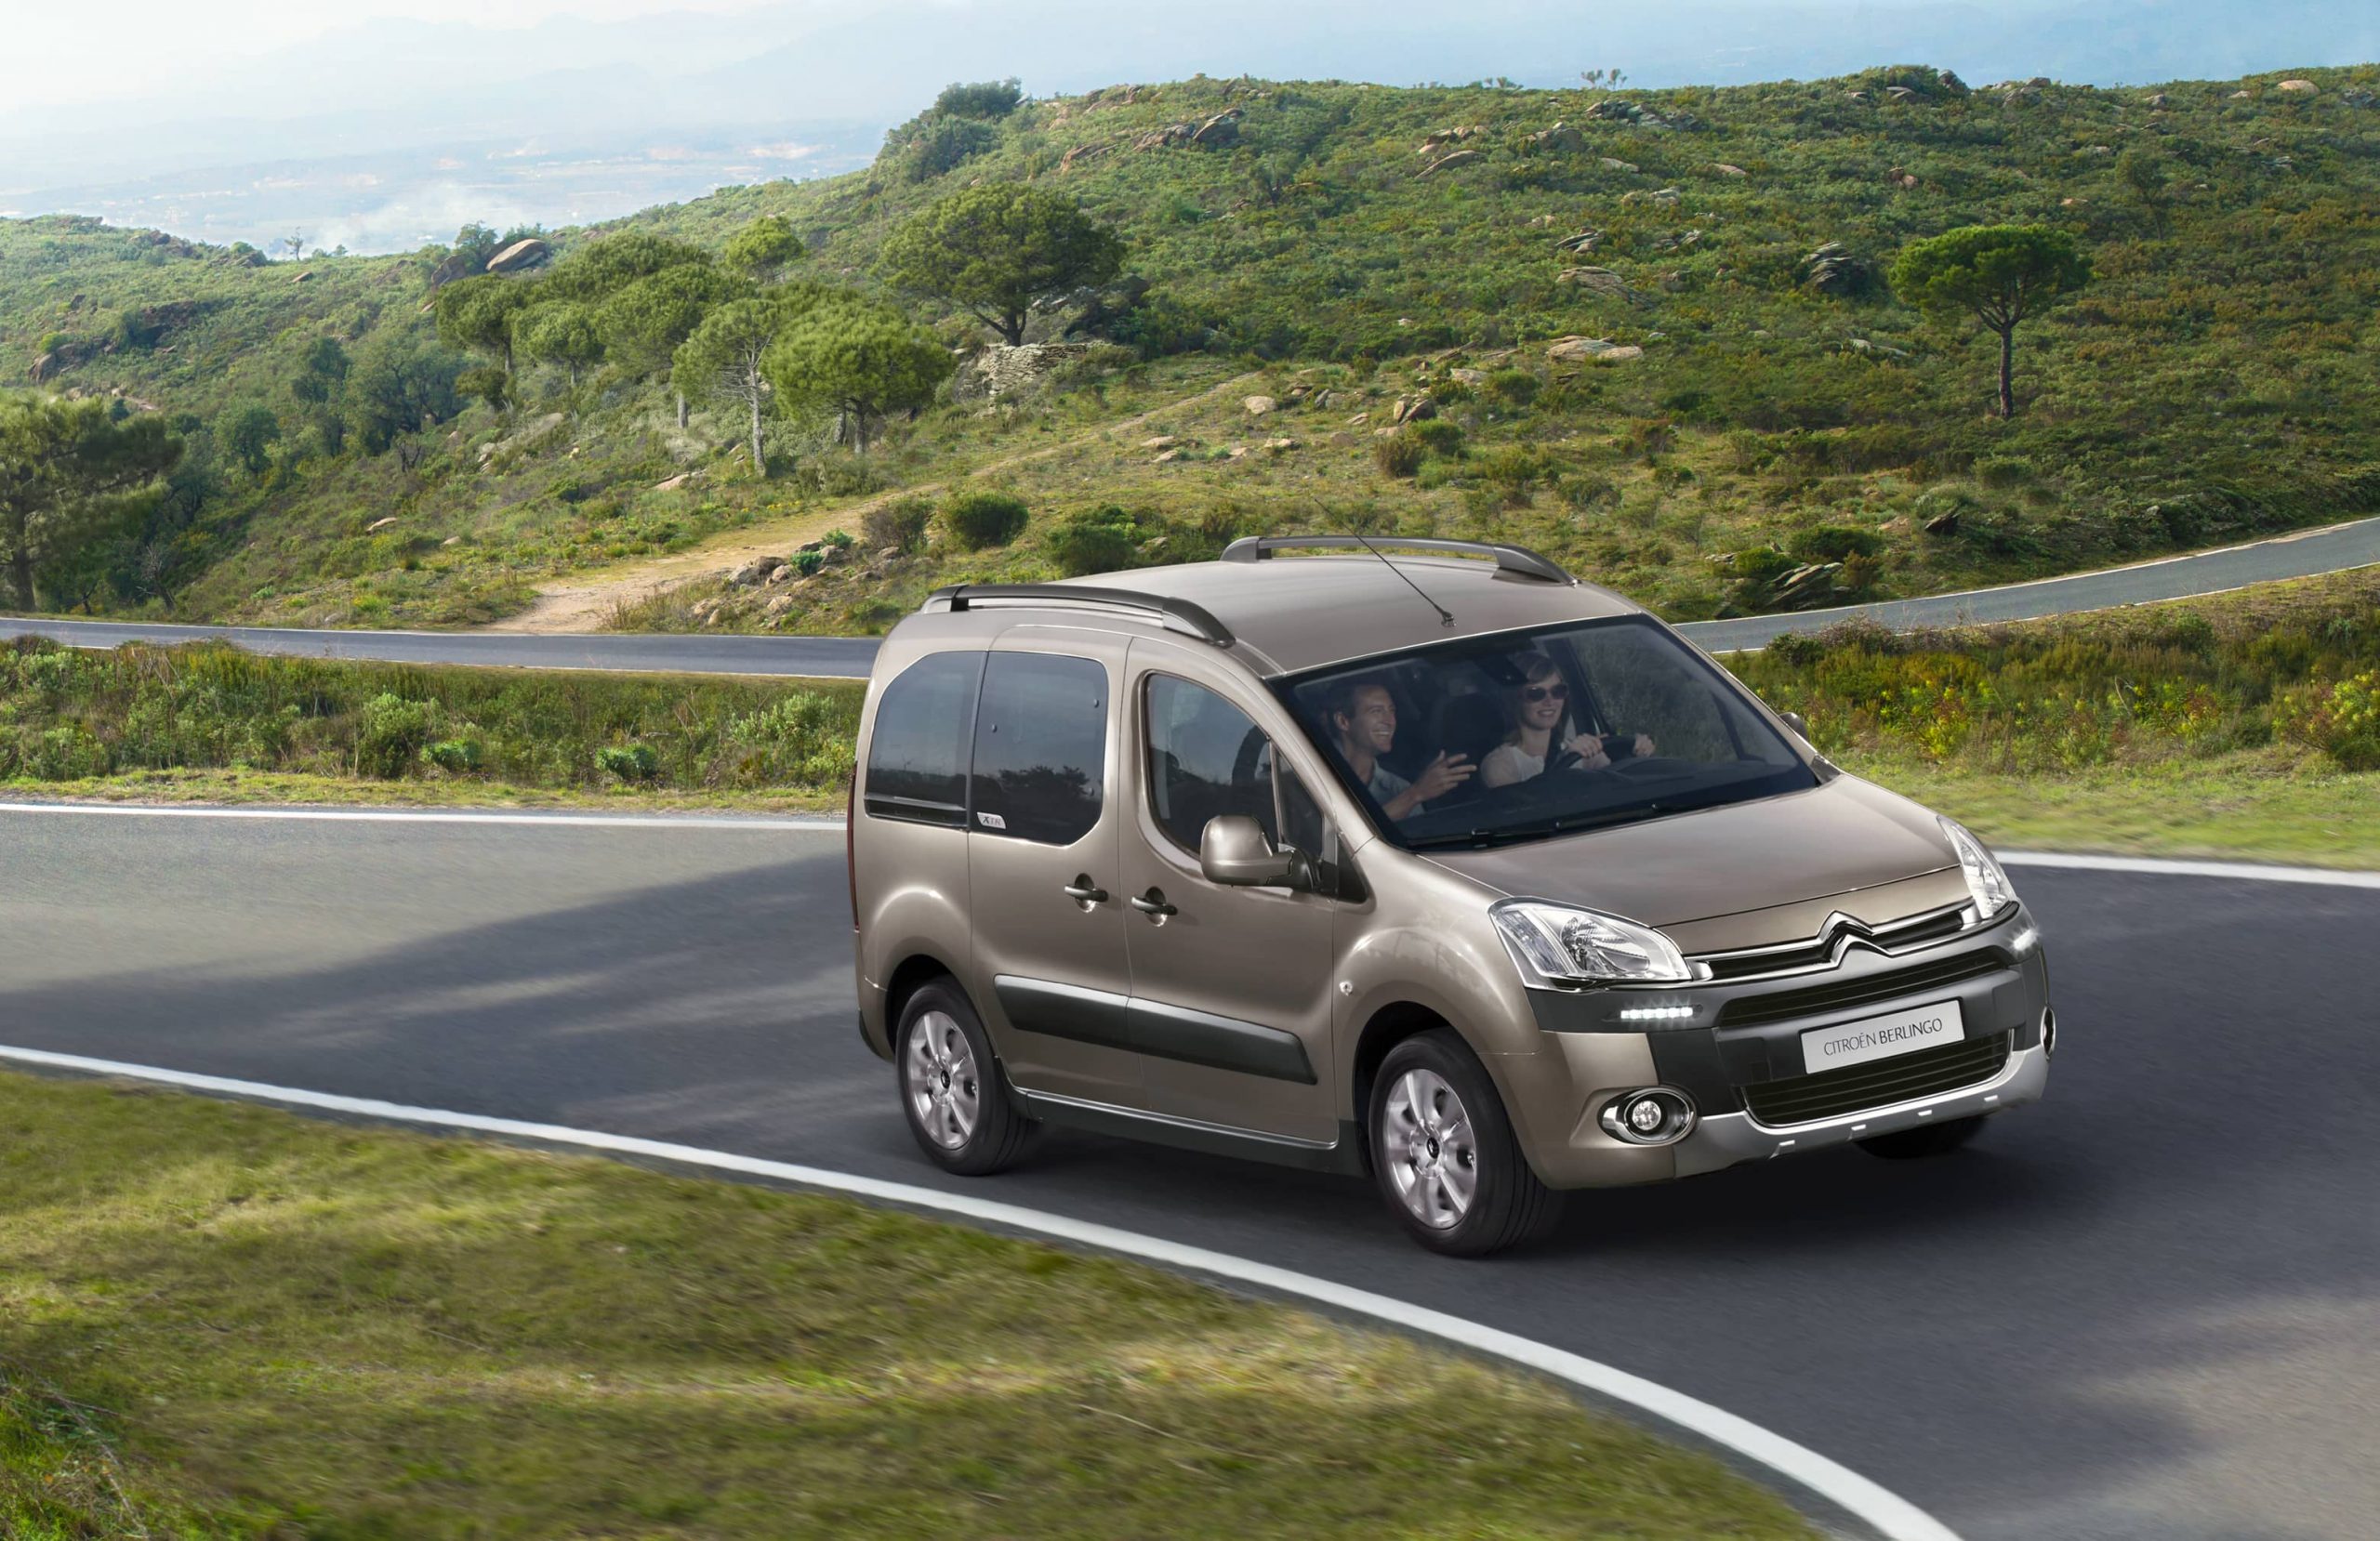 Citroen Berlingo Used for our 10 Best Vehicles for UK Taxi Drivers